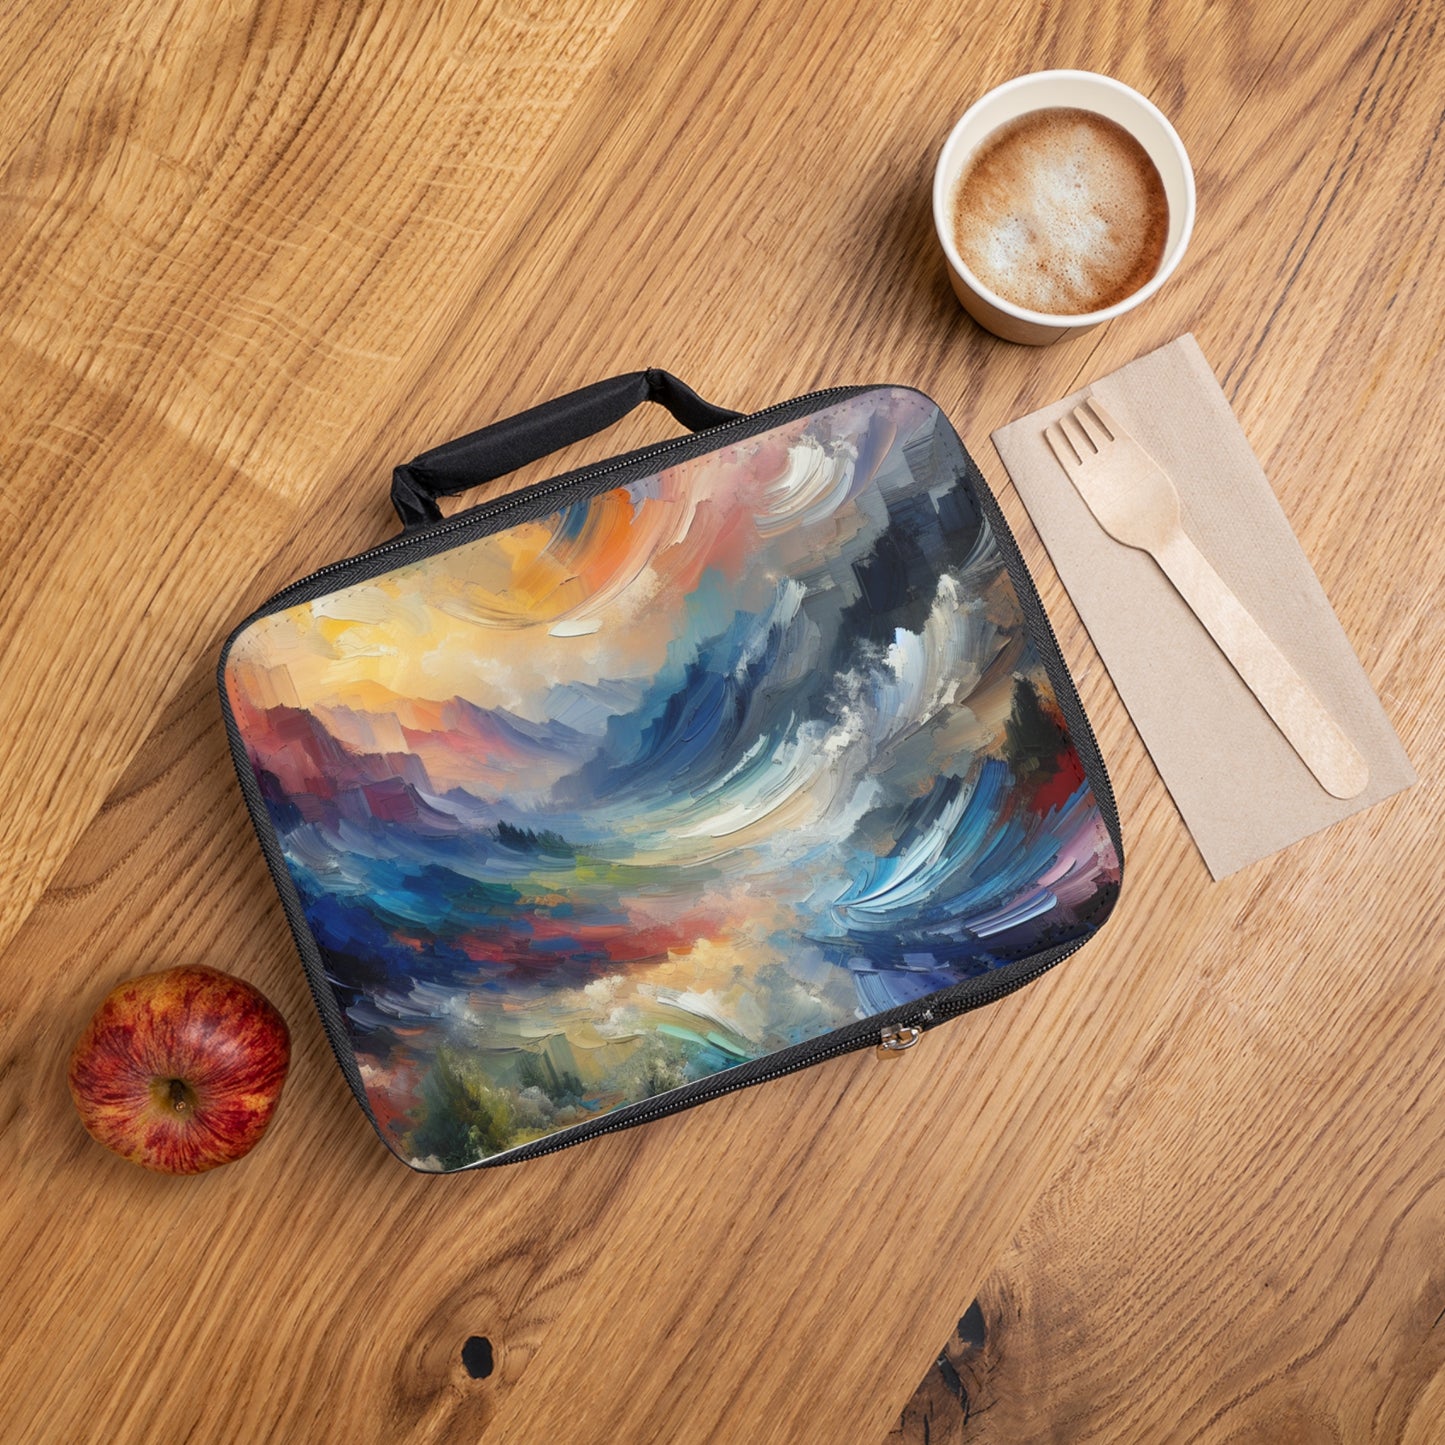 "Abstract Landscape: Exploring Emotional Depths Through Color & Texture" - The Alien Lunch Bag Abstract Expressionism Style